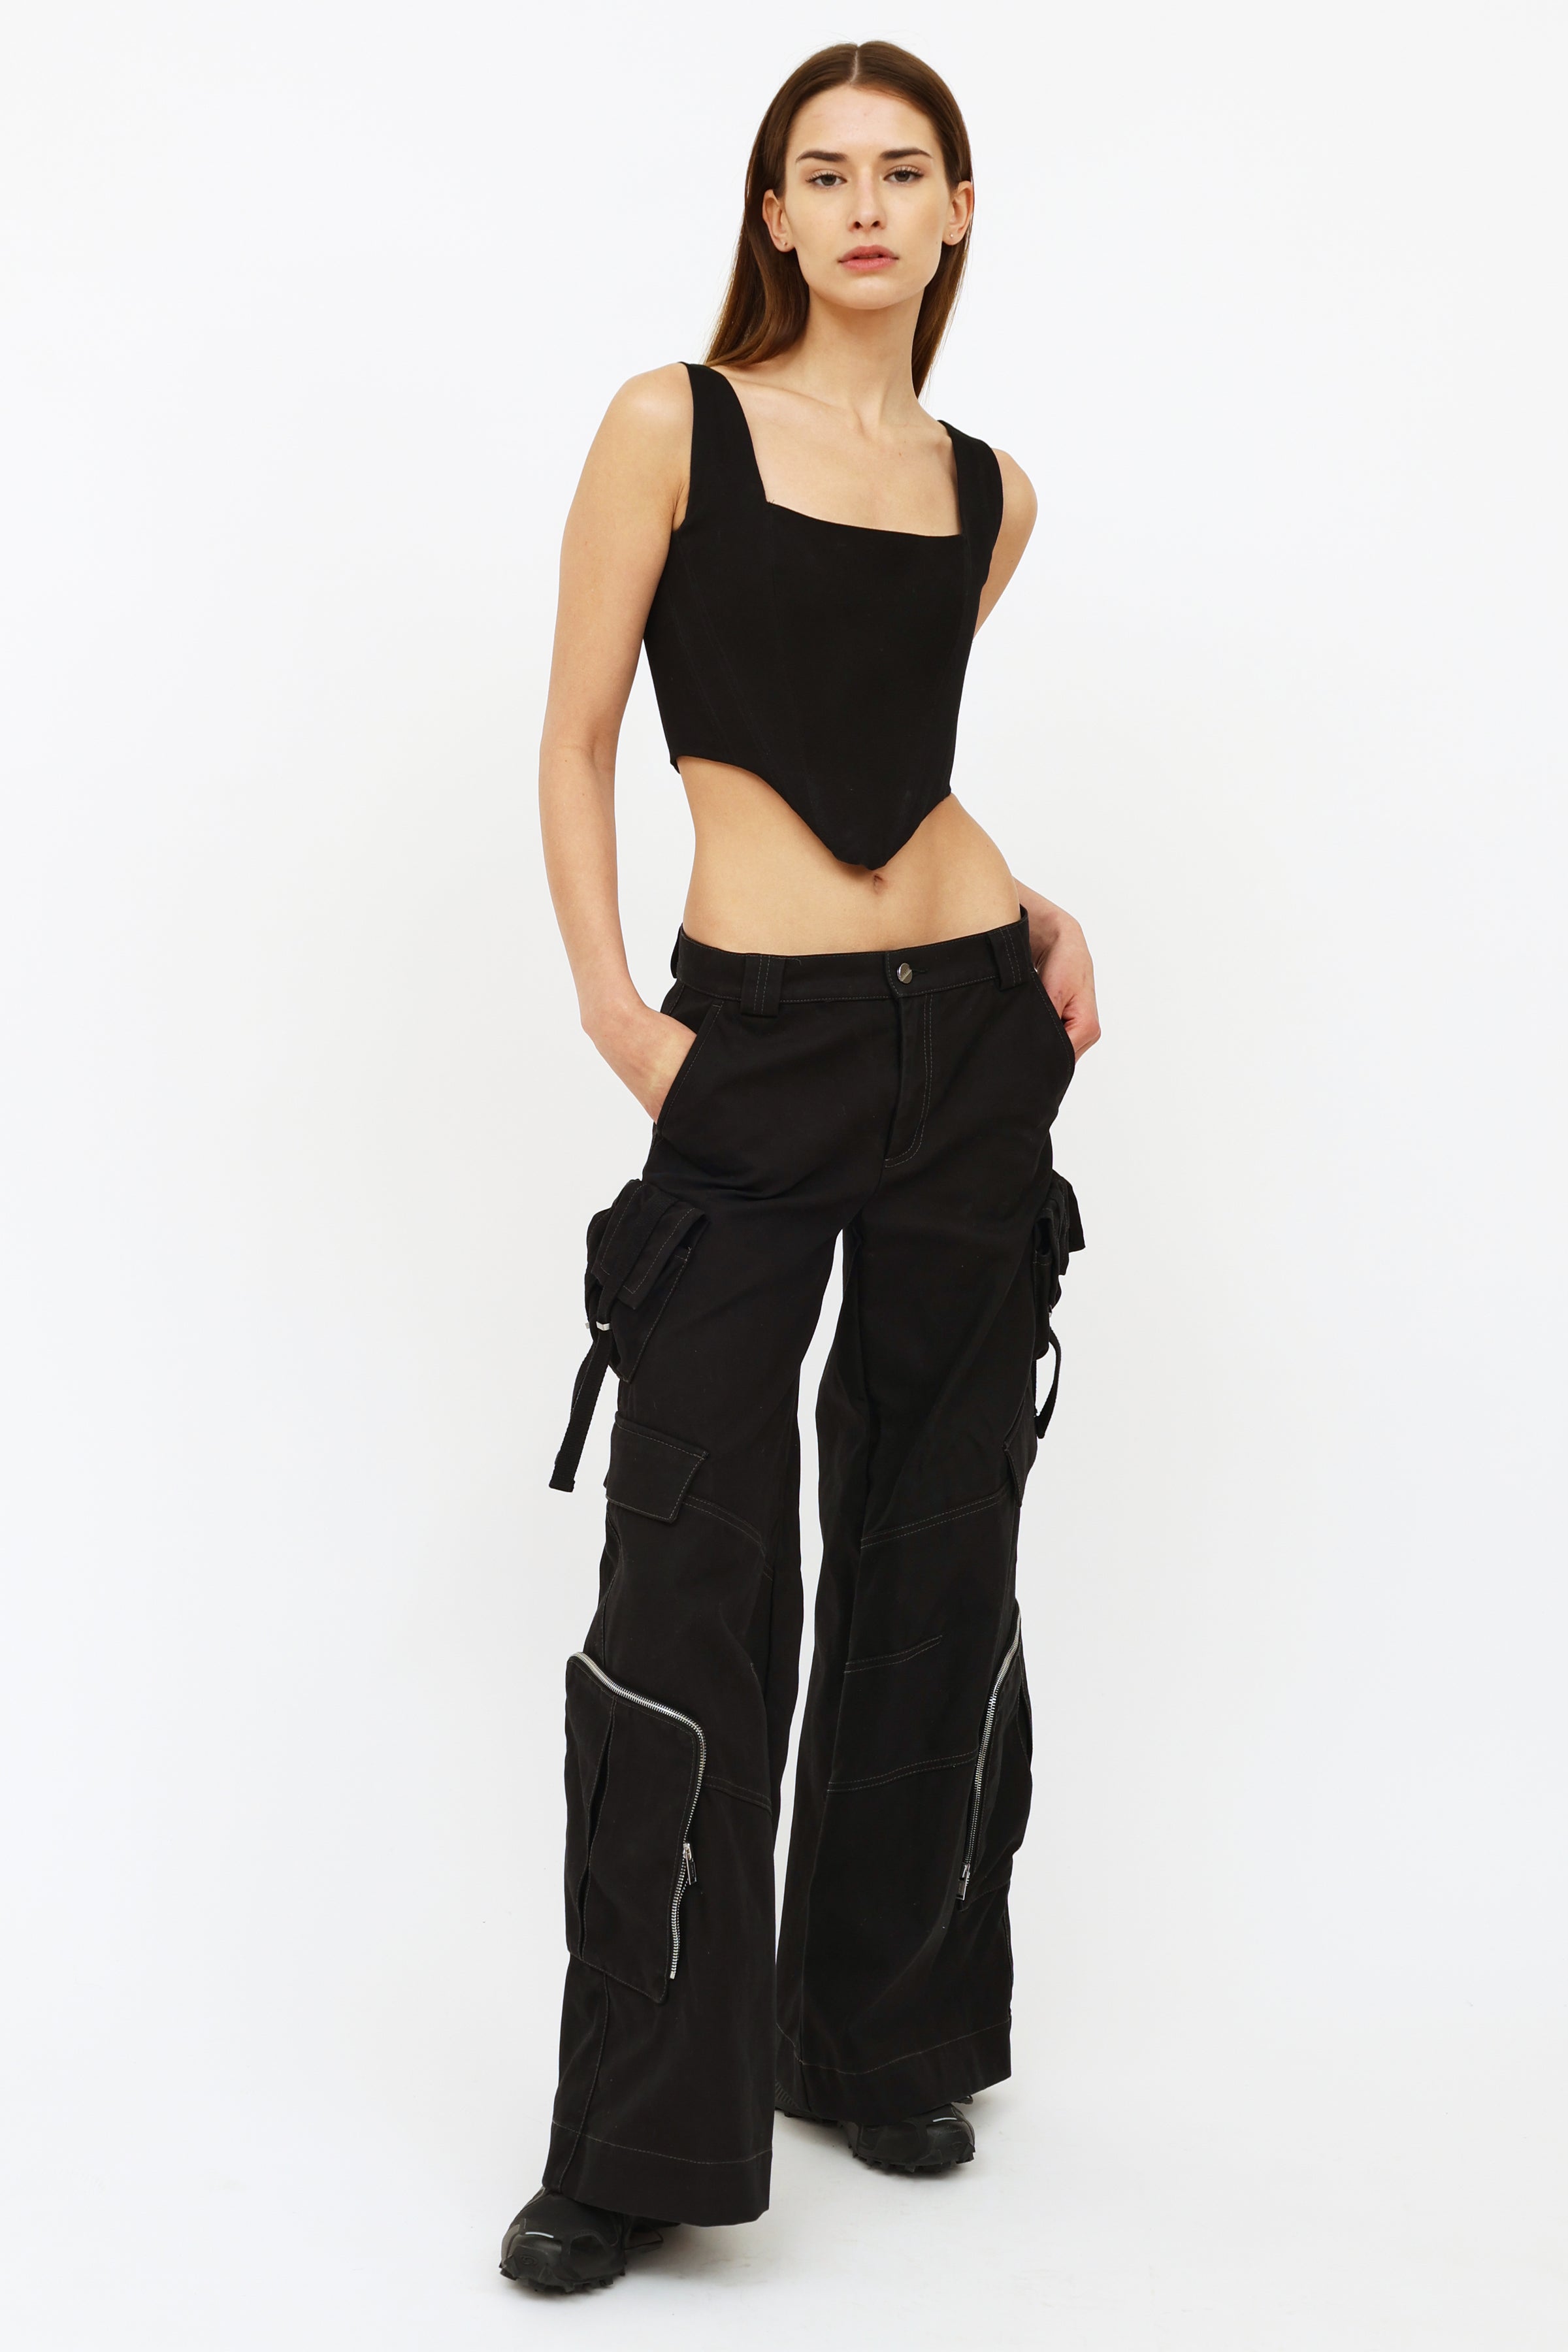 Dion Lee  Black Cargo Pants  VSP Consignment